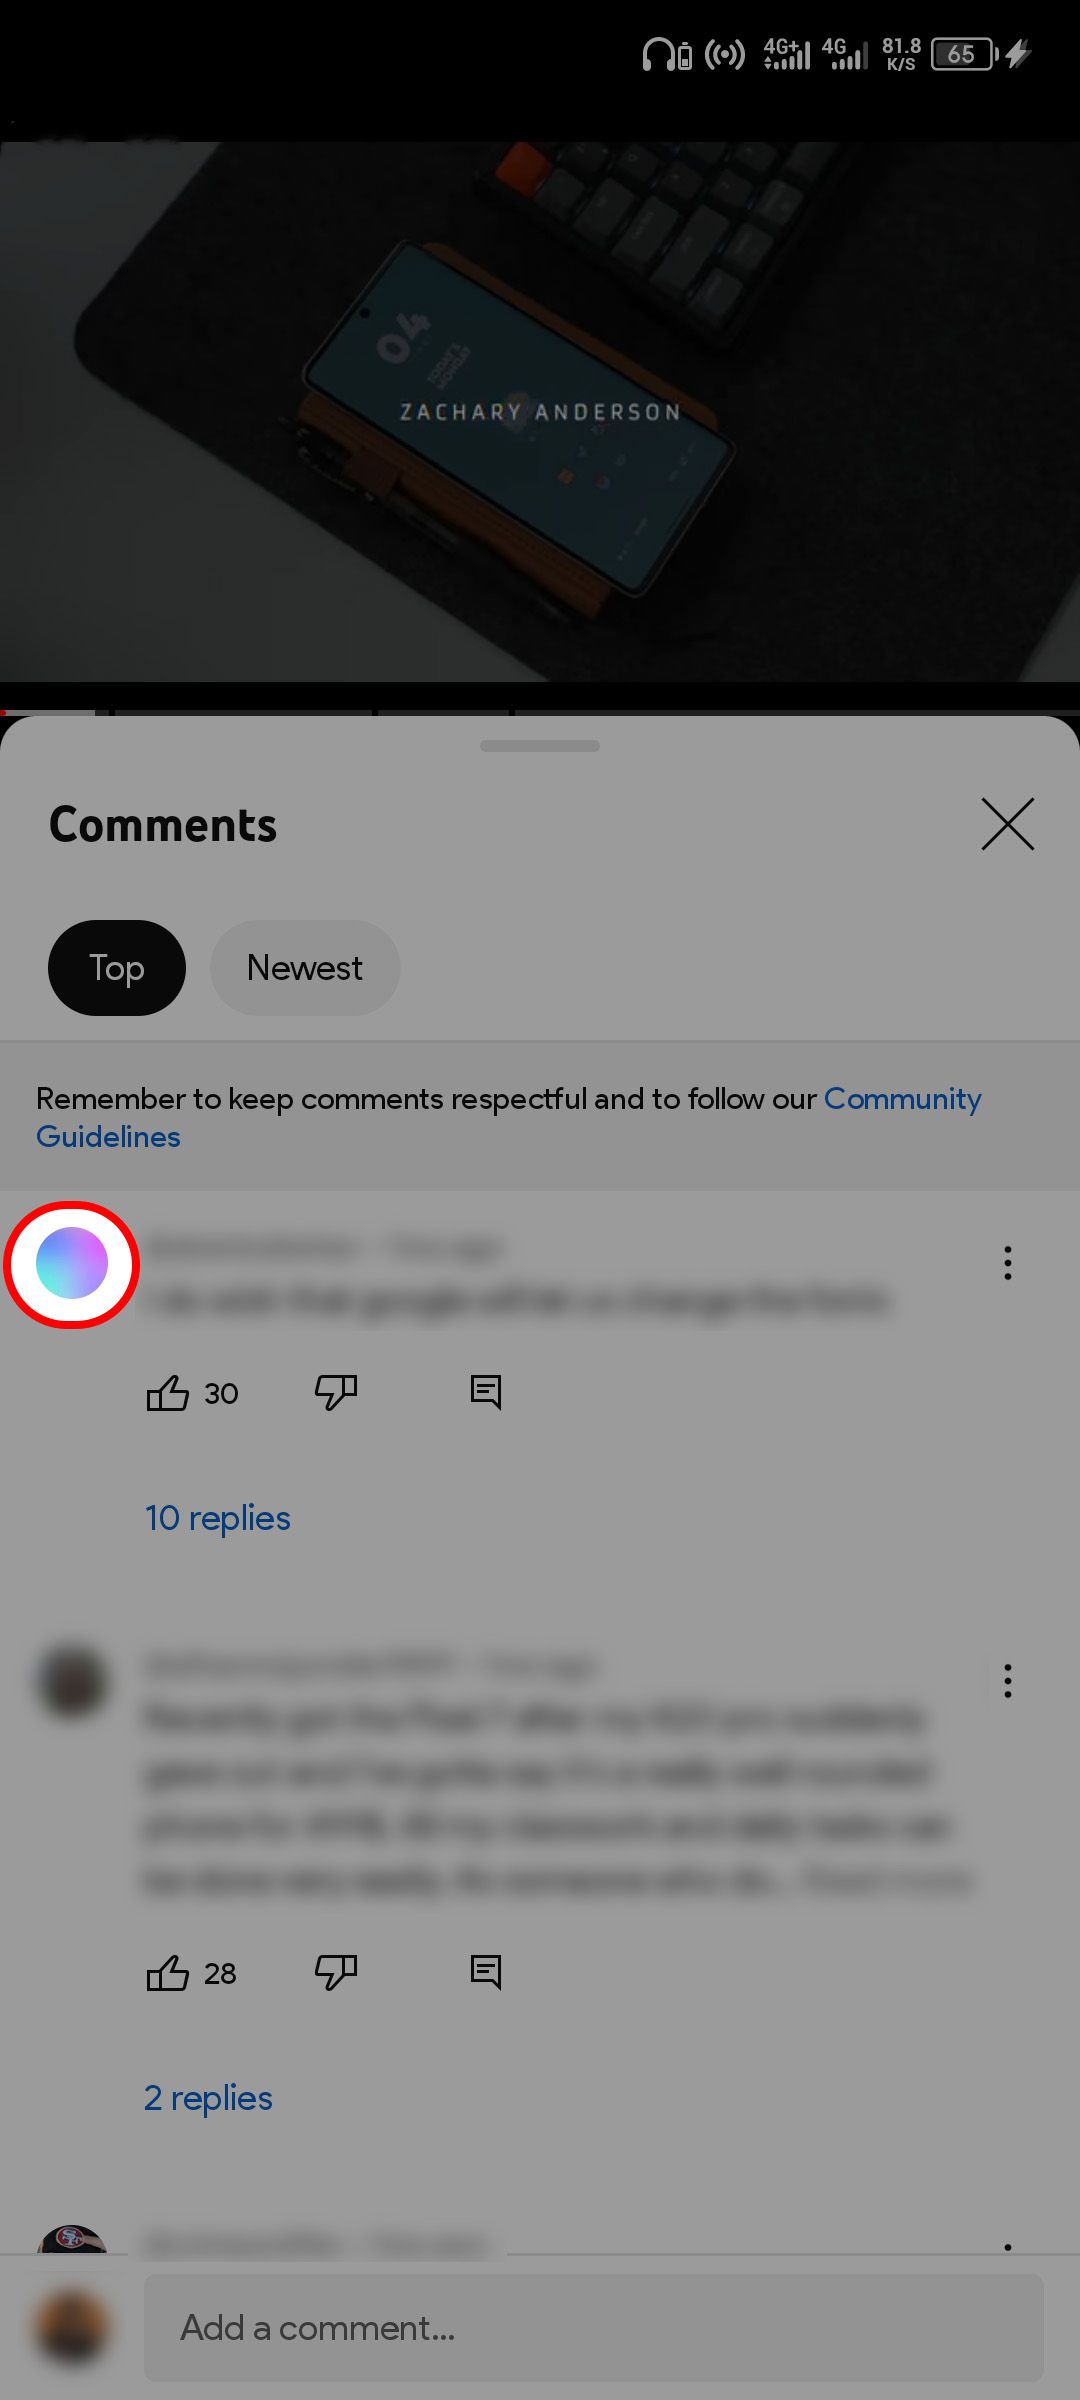 Vieiwing a channel's page from the comments section